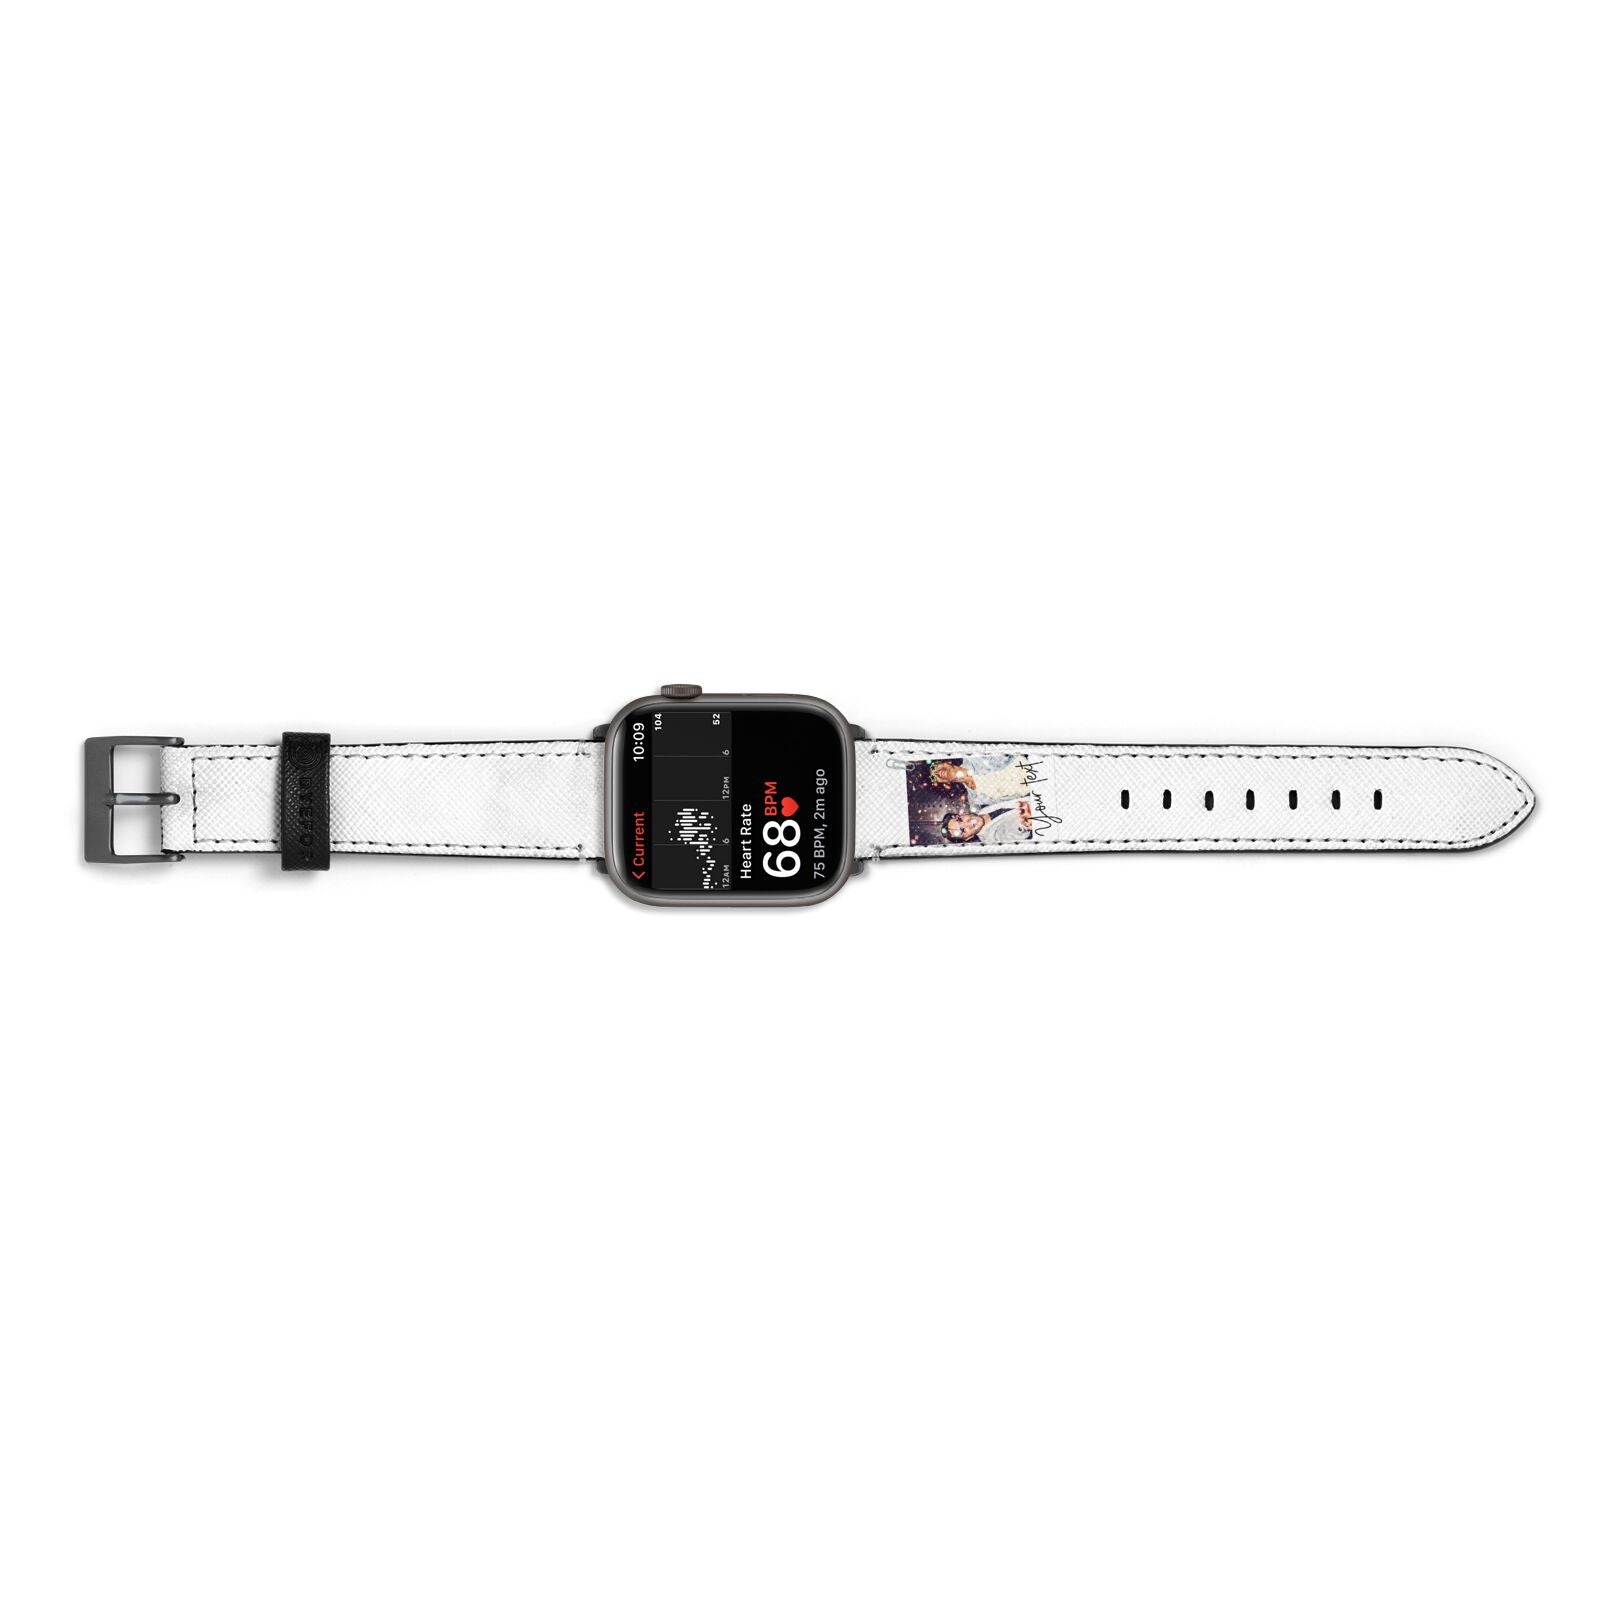 Personalised Photo with Text Apple Watch Strap Size 38mm Landscape Image Space Grey Hardware